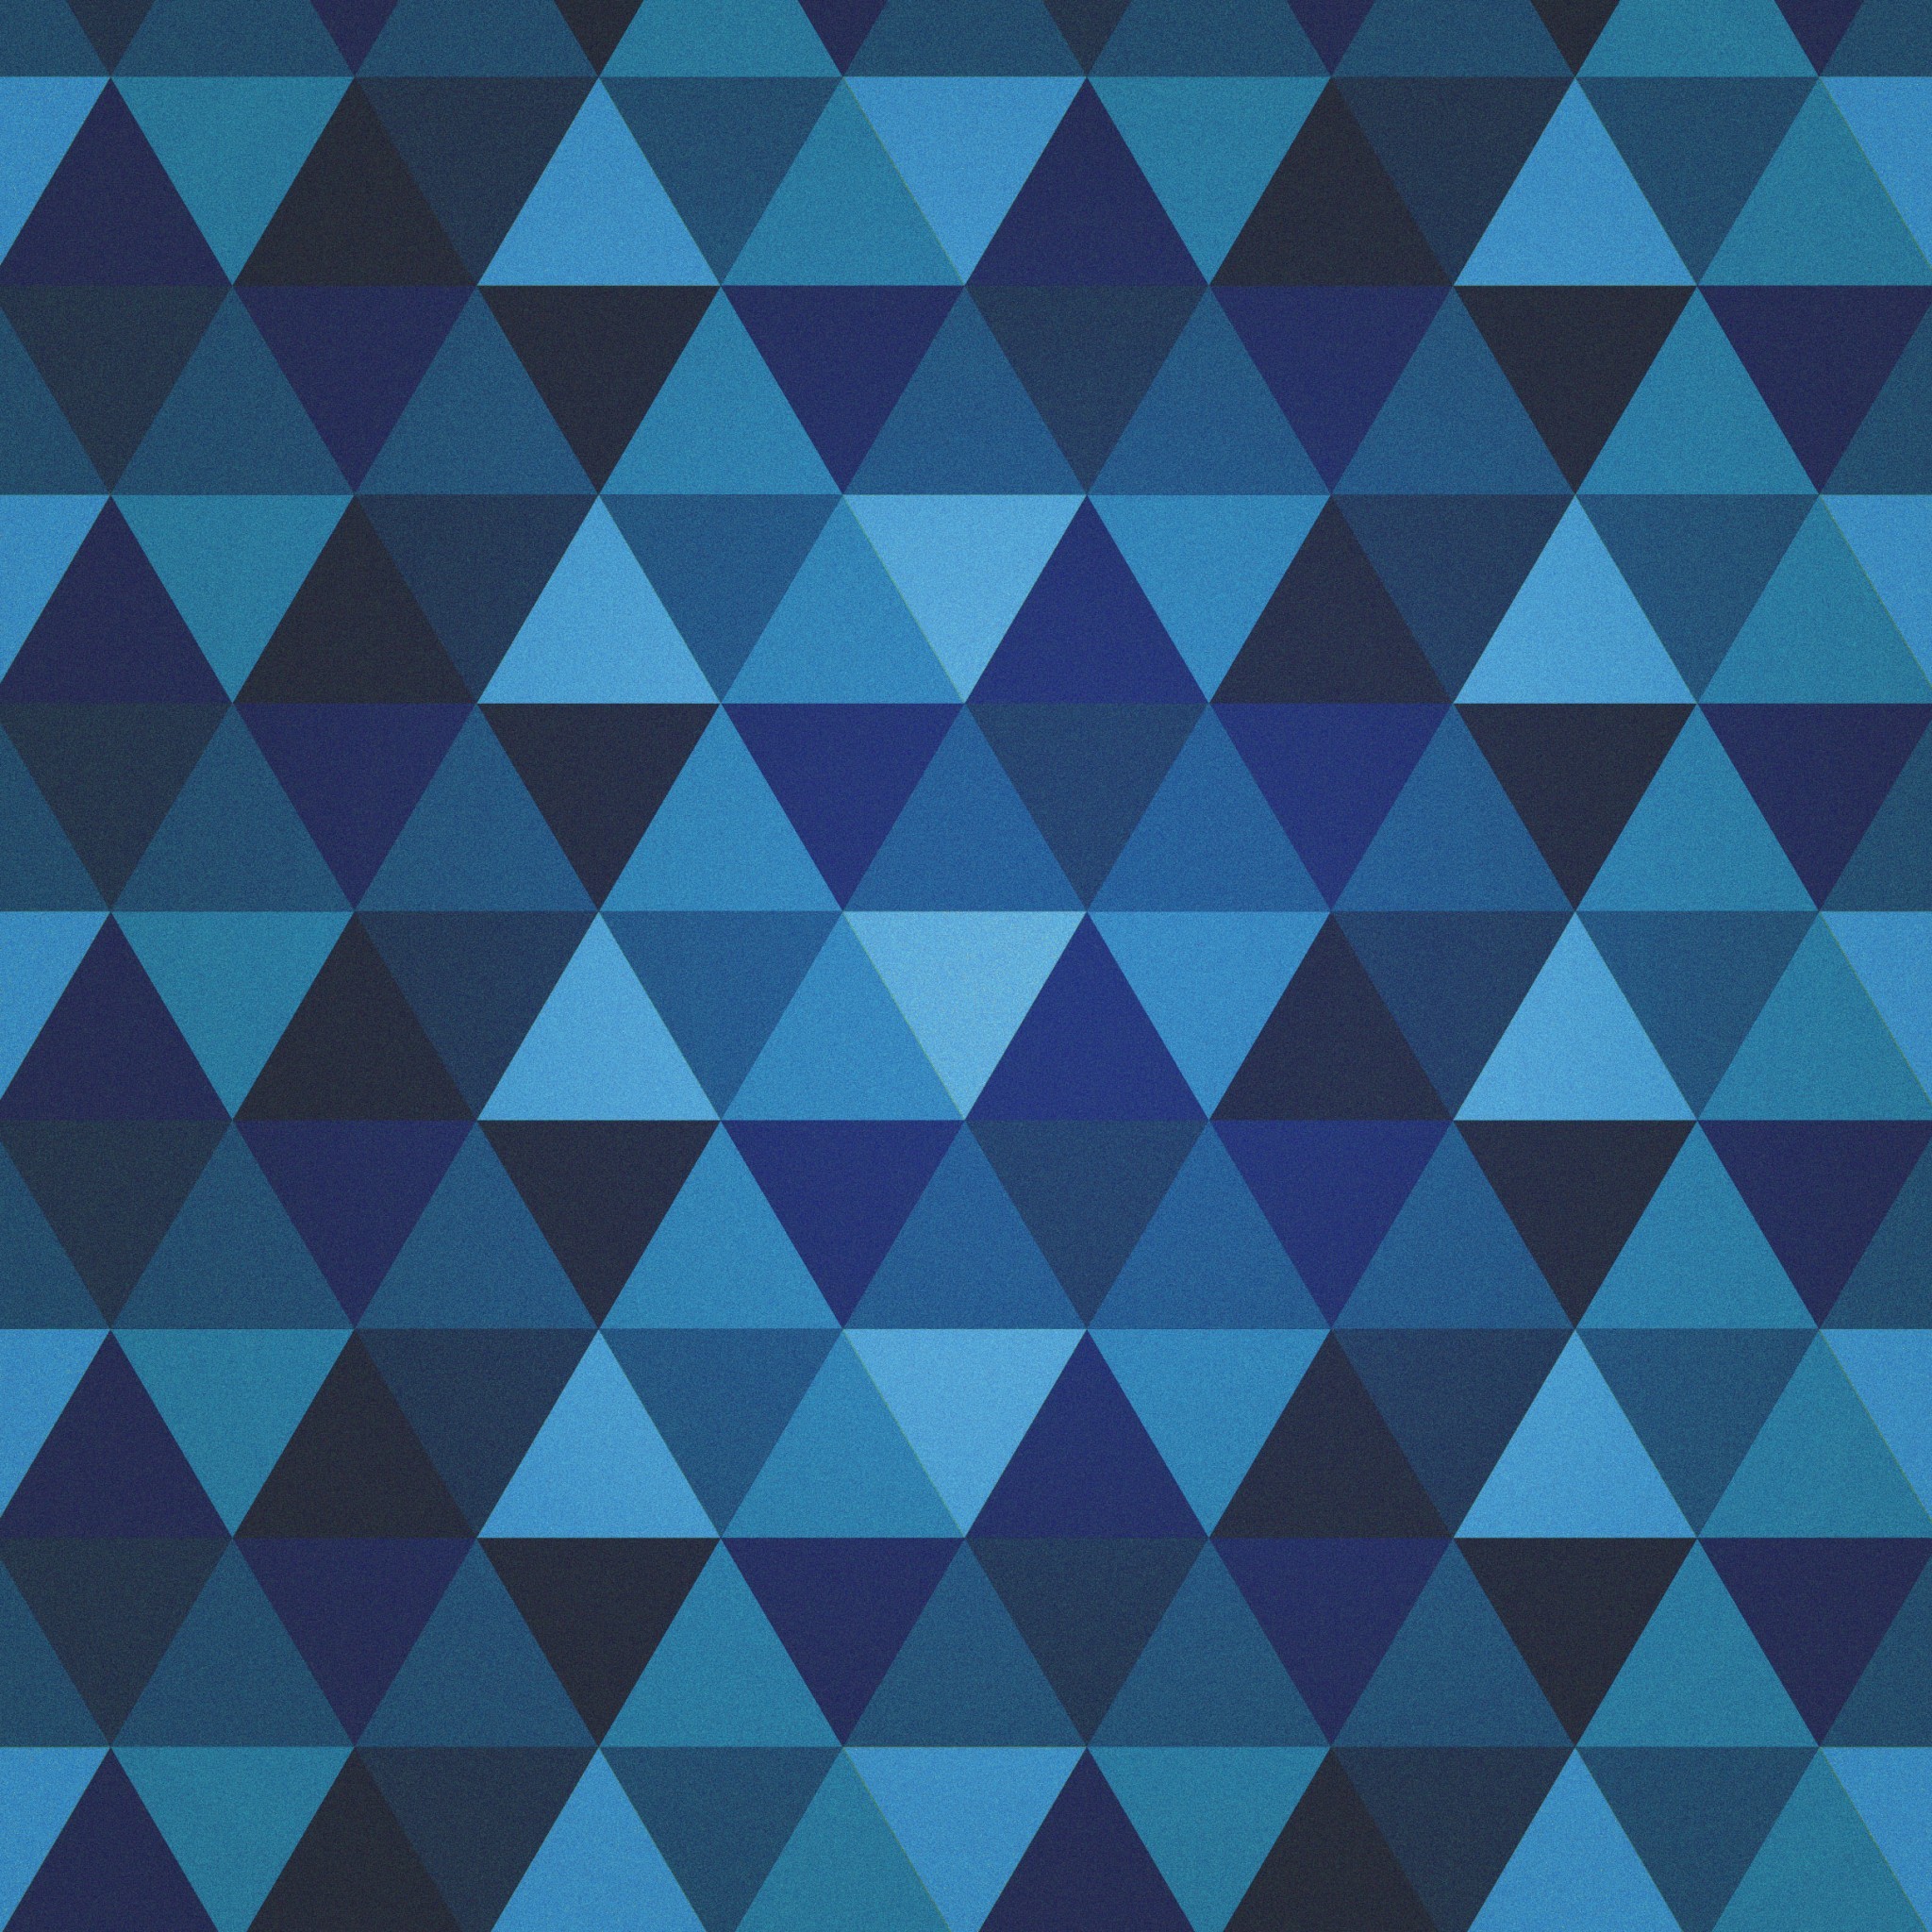 2048x2048 Dark Blue Triangle - Tap to see more Triangular shaped wallpaper! | @mobile9